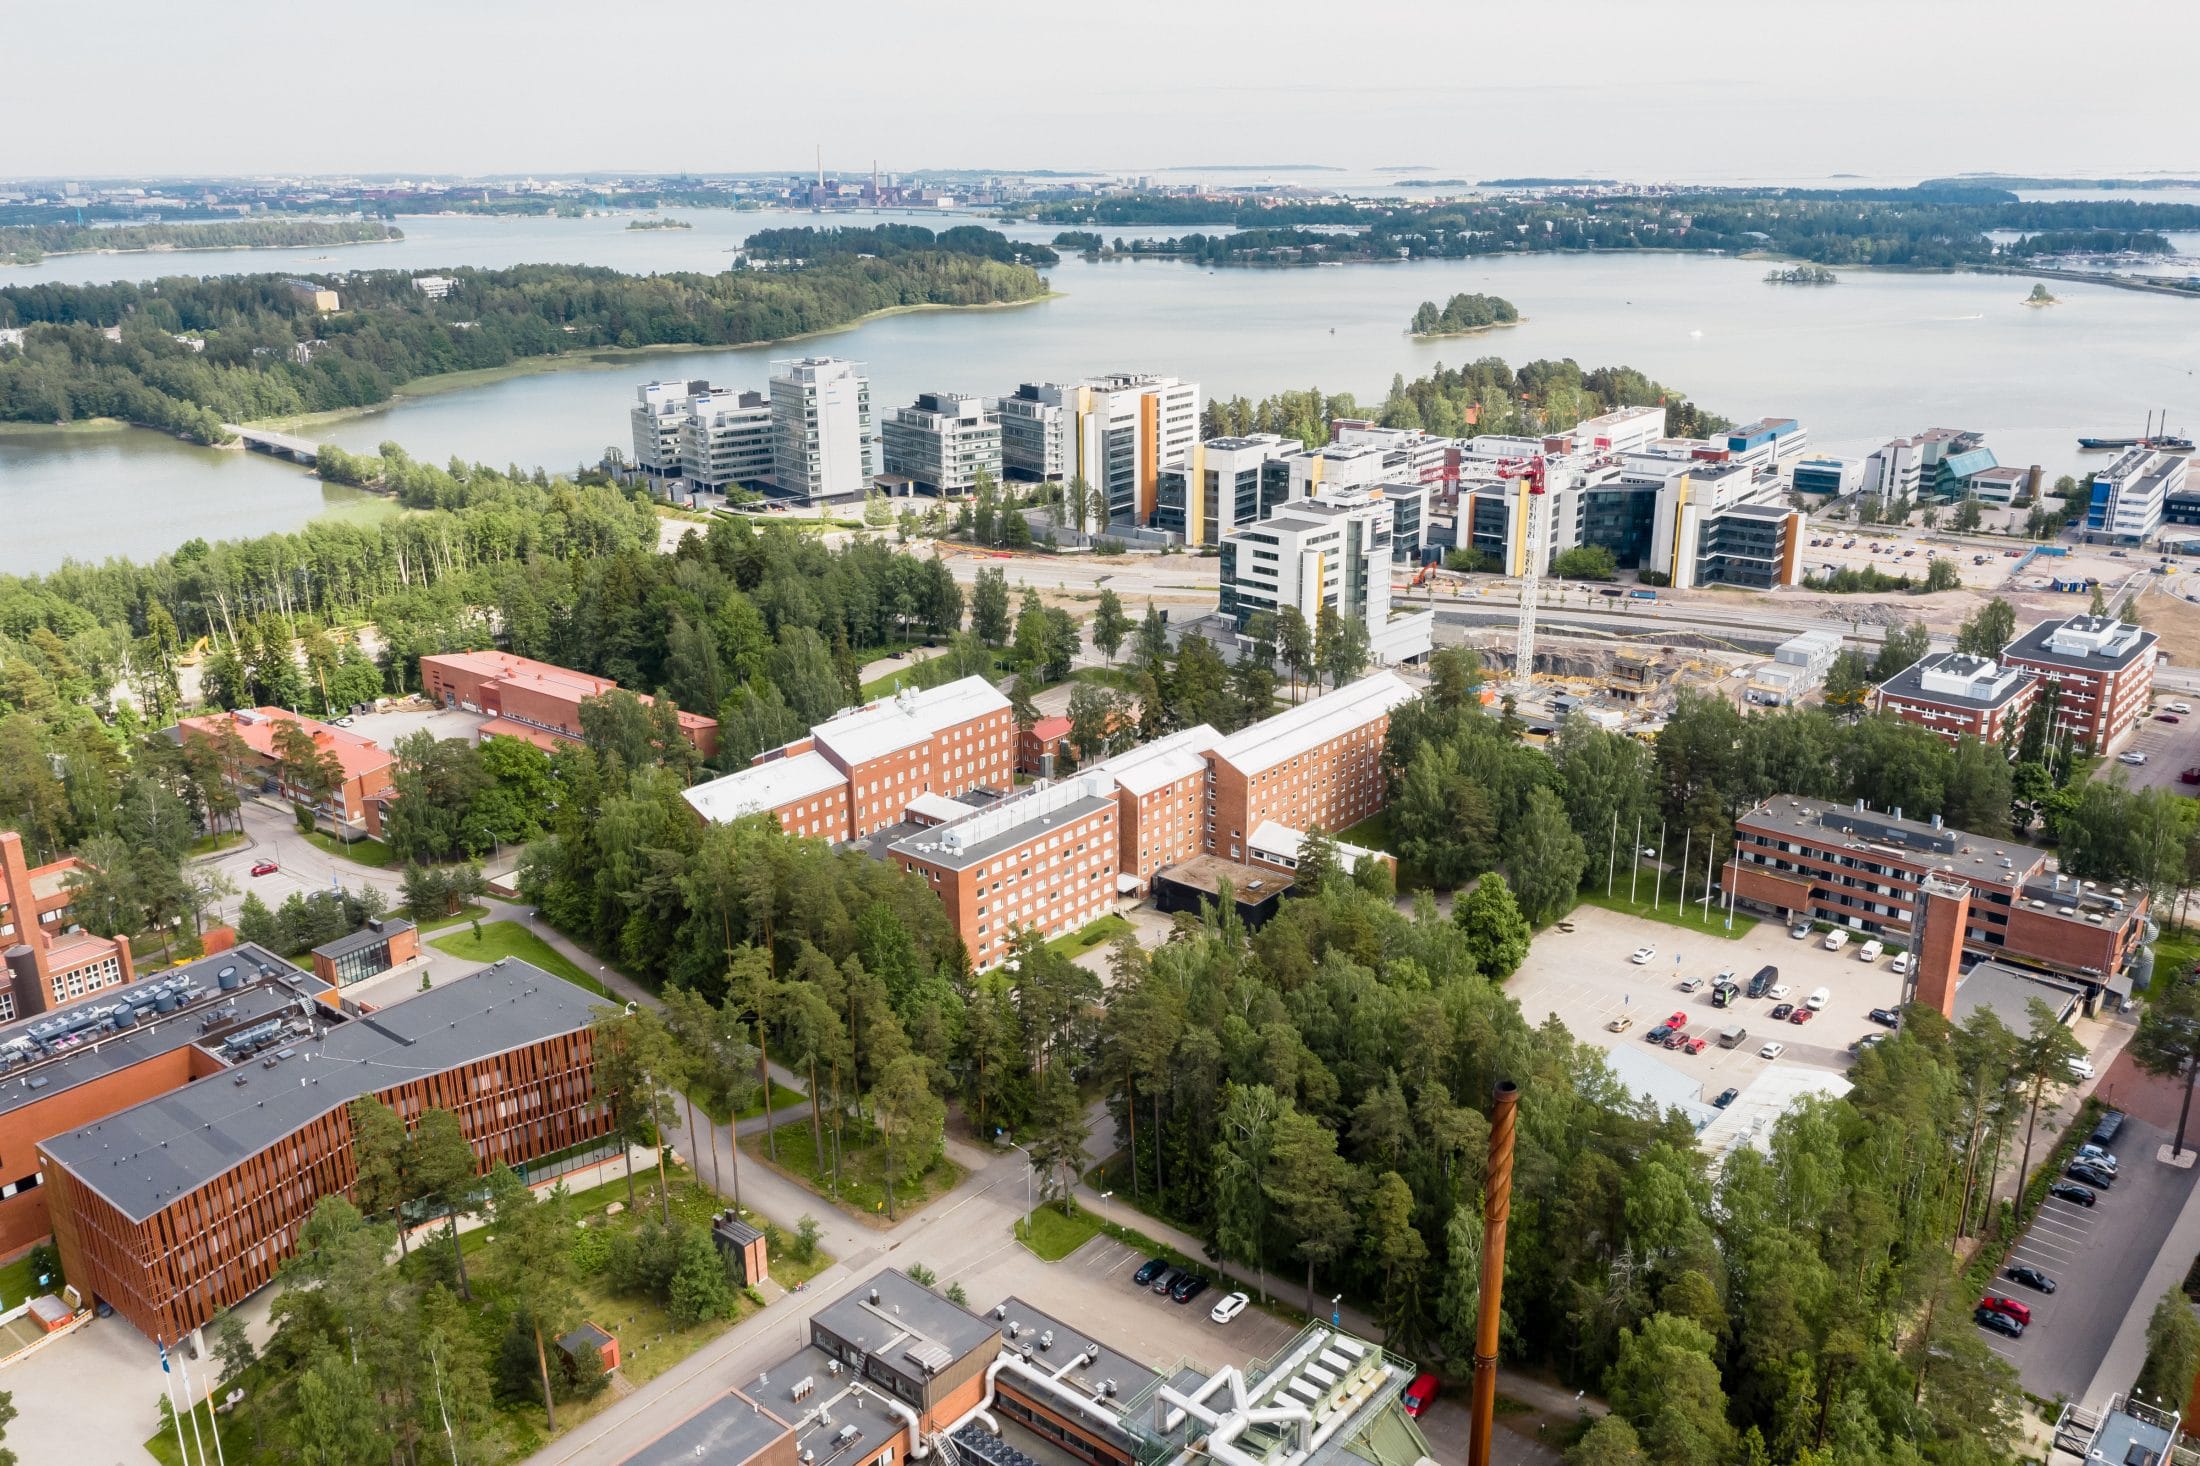 Newil&Bau and Kusinkapital have acquired a significant development complex in Otaniemi from the Finnish state-owned Senaatti